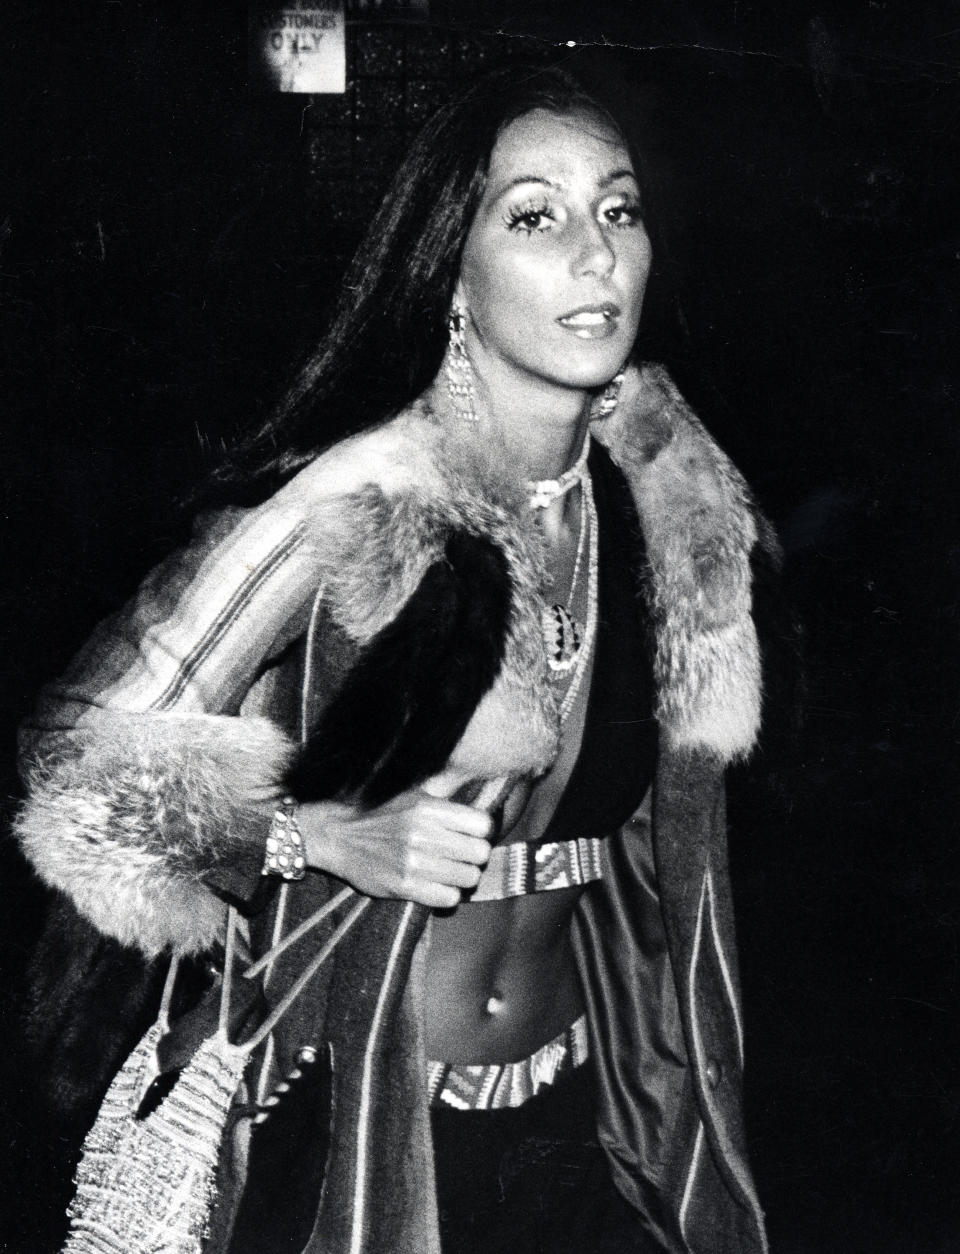 A photo of Cher from 1974.&nbsp;